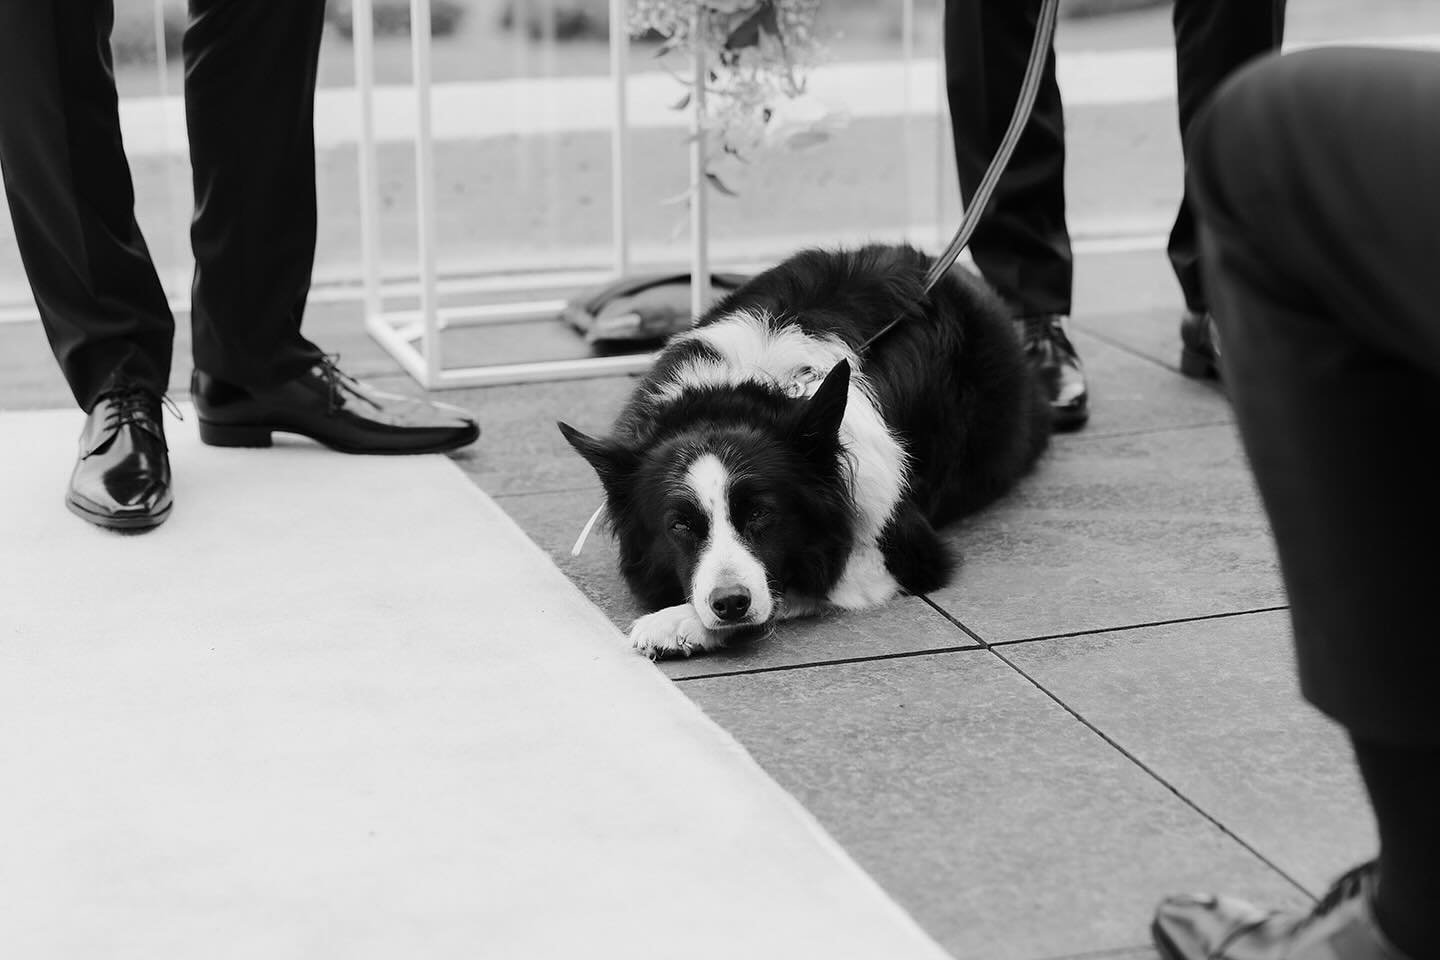 Dogs + weddings = so, so good 🐶

Charlie was a hell of a good boy for Matt &amp; Shay&rsquo;s ceremony! 

📸 @dustandsaltphotography